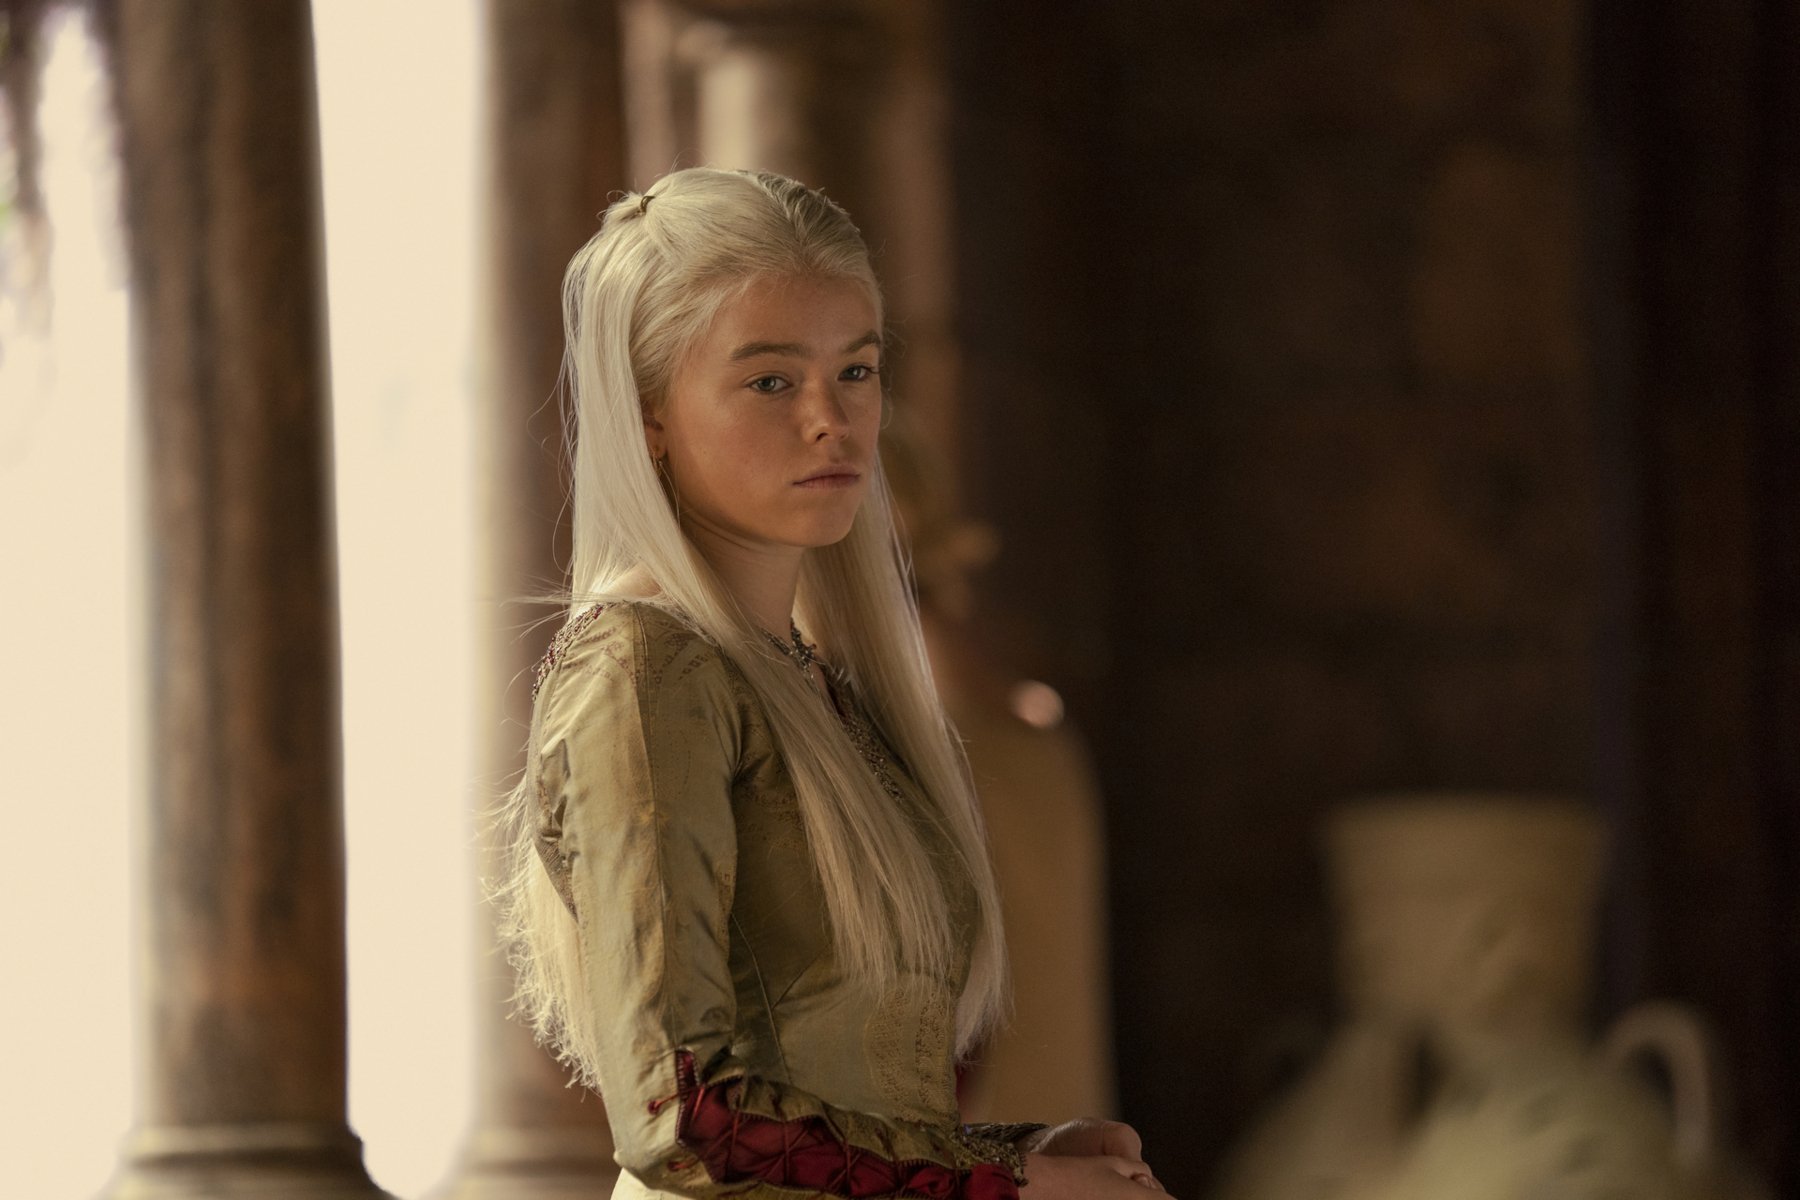 Milly Alcock as Princess Rhaenyra Targaryen in 'House of the Dragon.' She's wearing a gold dress, her blonde hair is down, and she's looking at something off-screen.